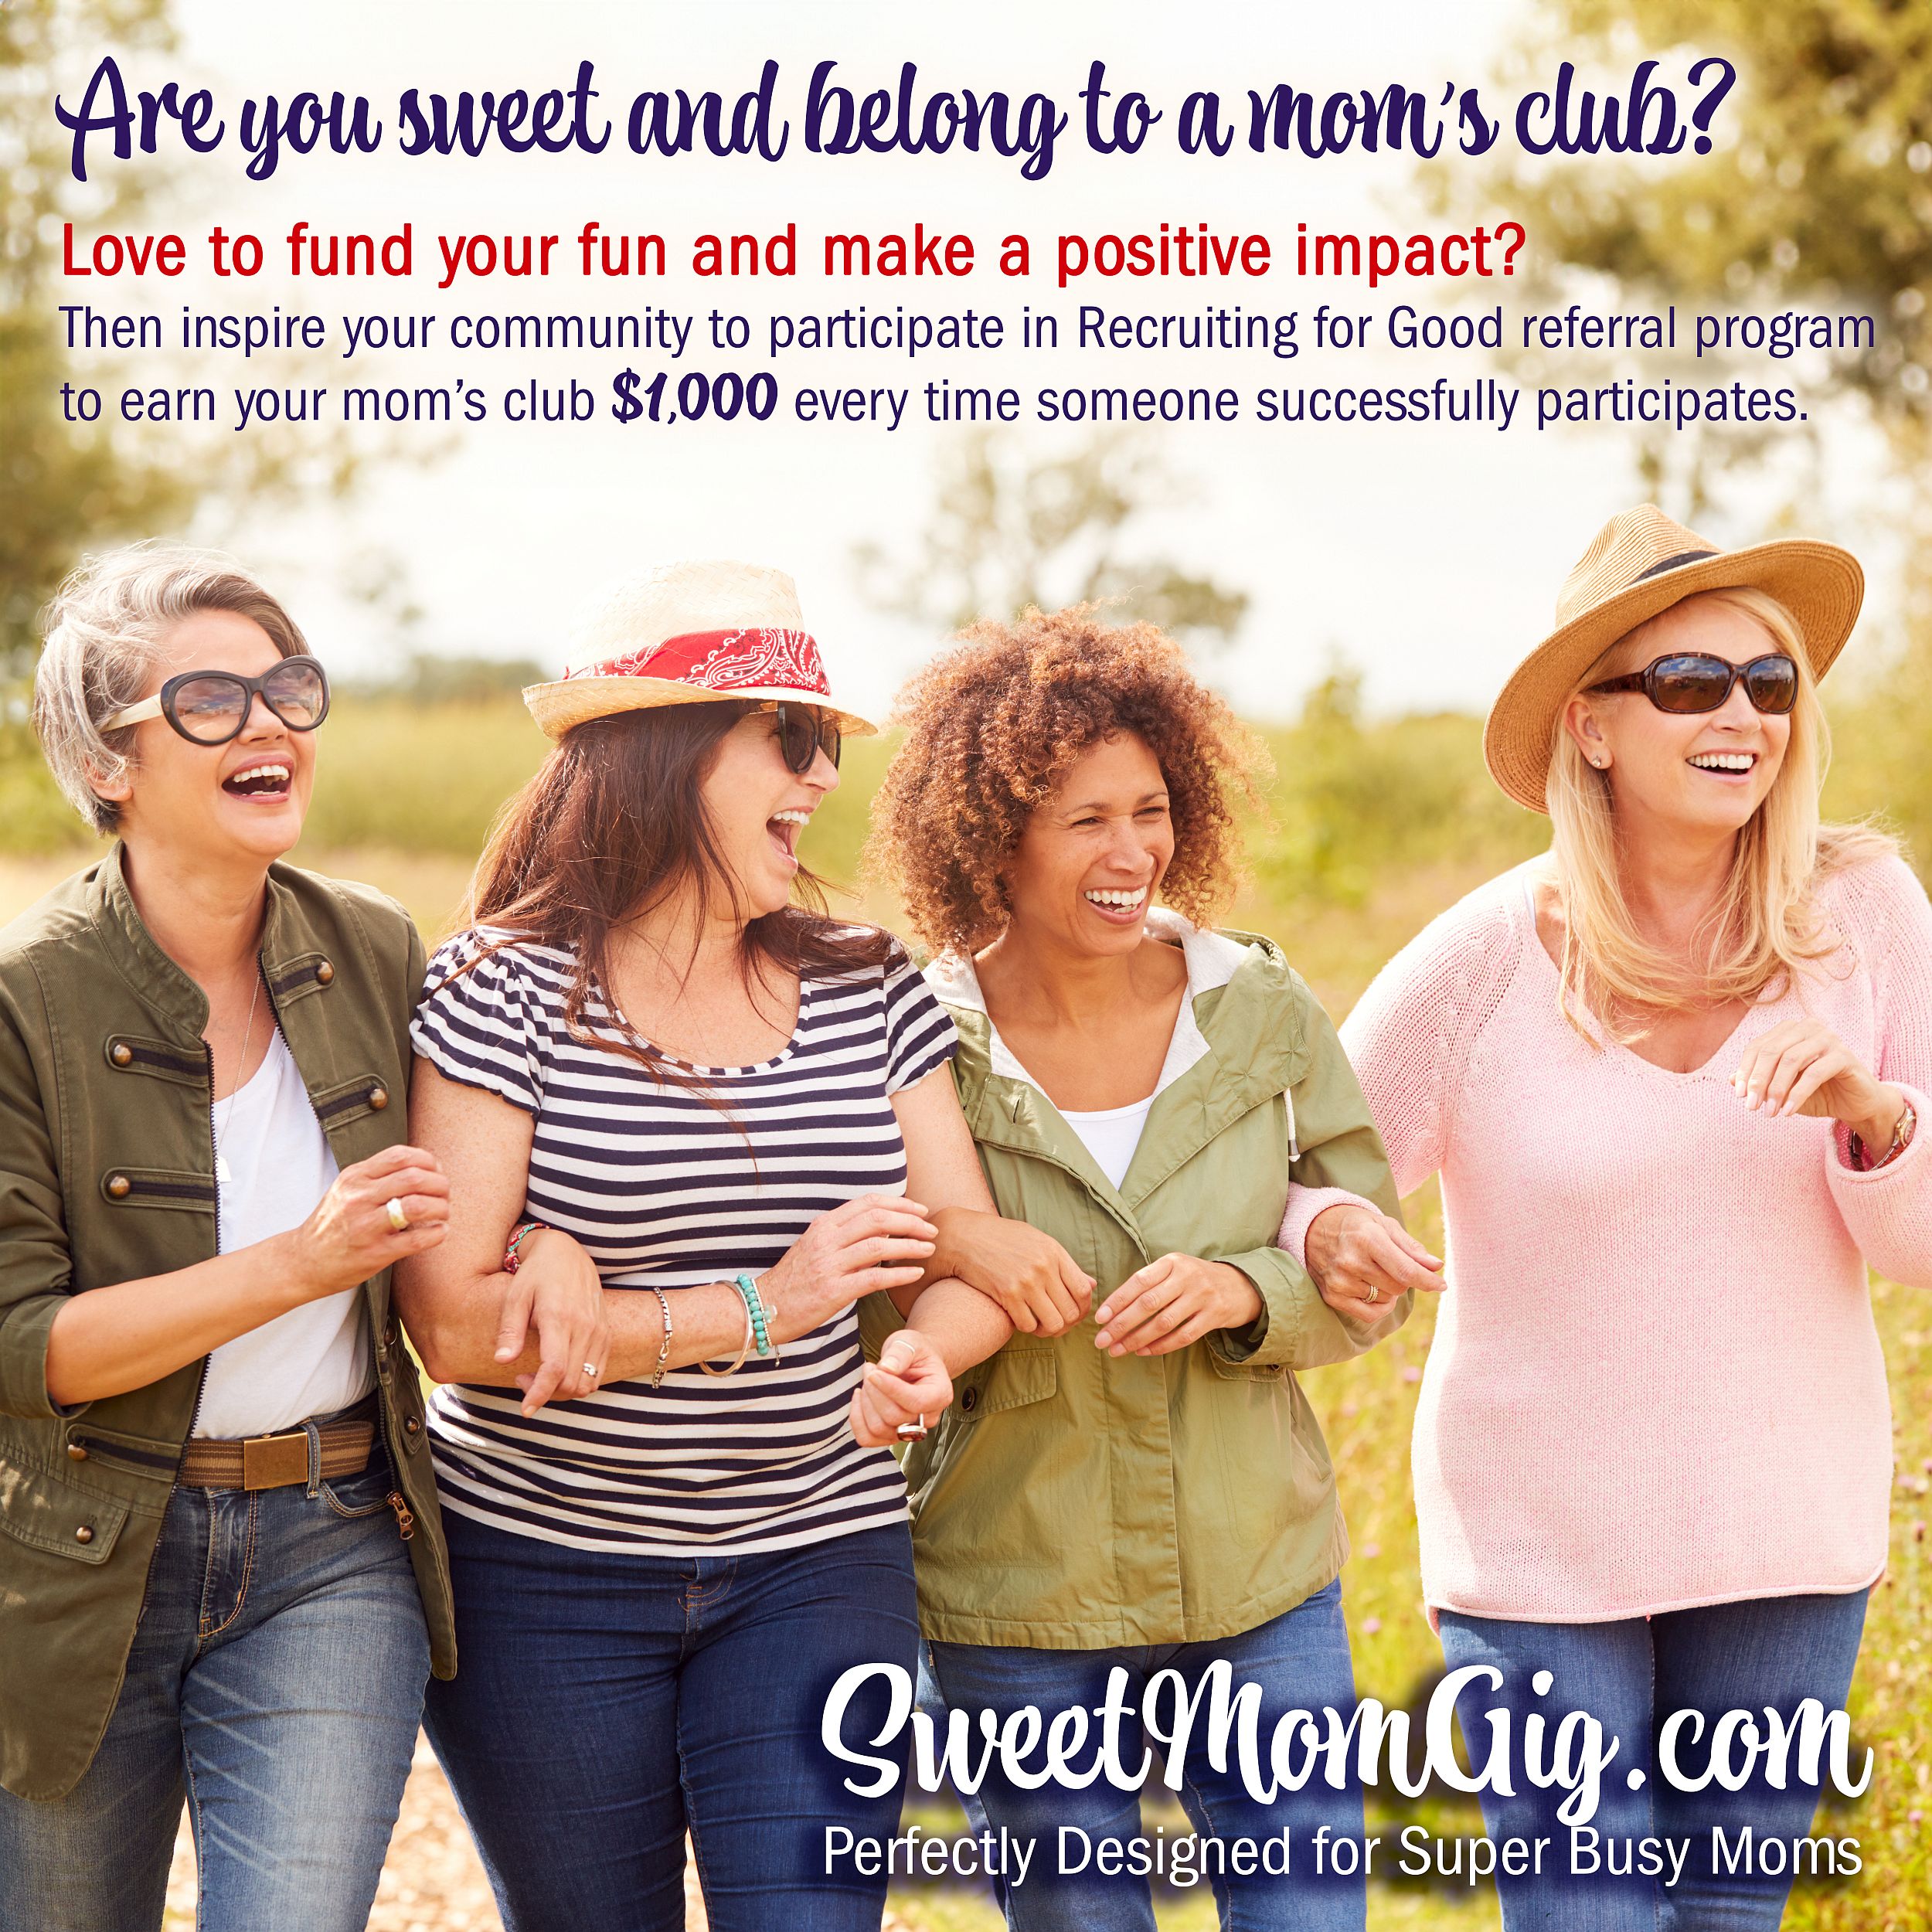 Are you sweet, love to make a positive impact, and want to fund your fun? Inspire your community to participate in Recruiting for Good referral program to earn $1000 for your mom club. To learn more visit www.SweetMomGig.com